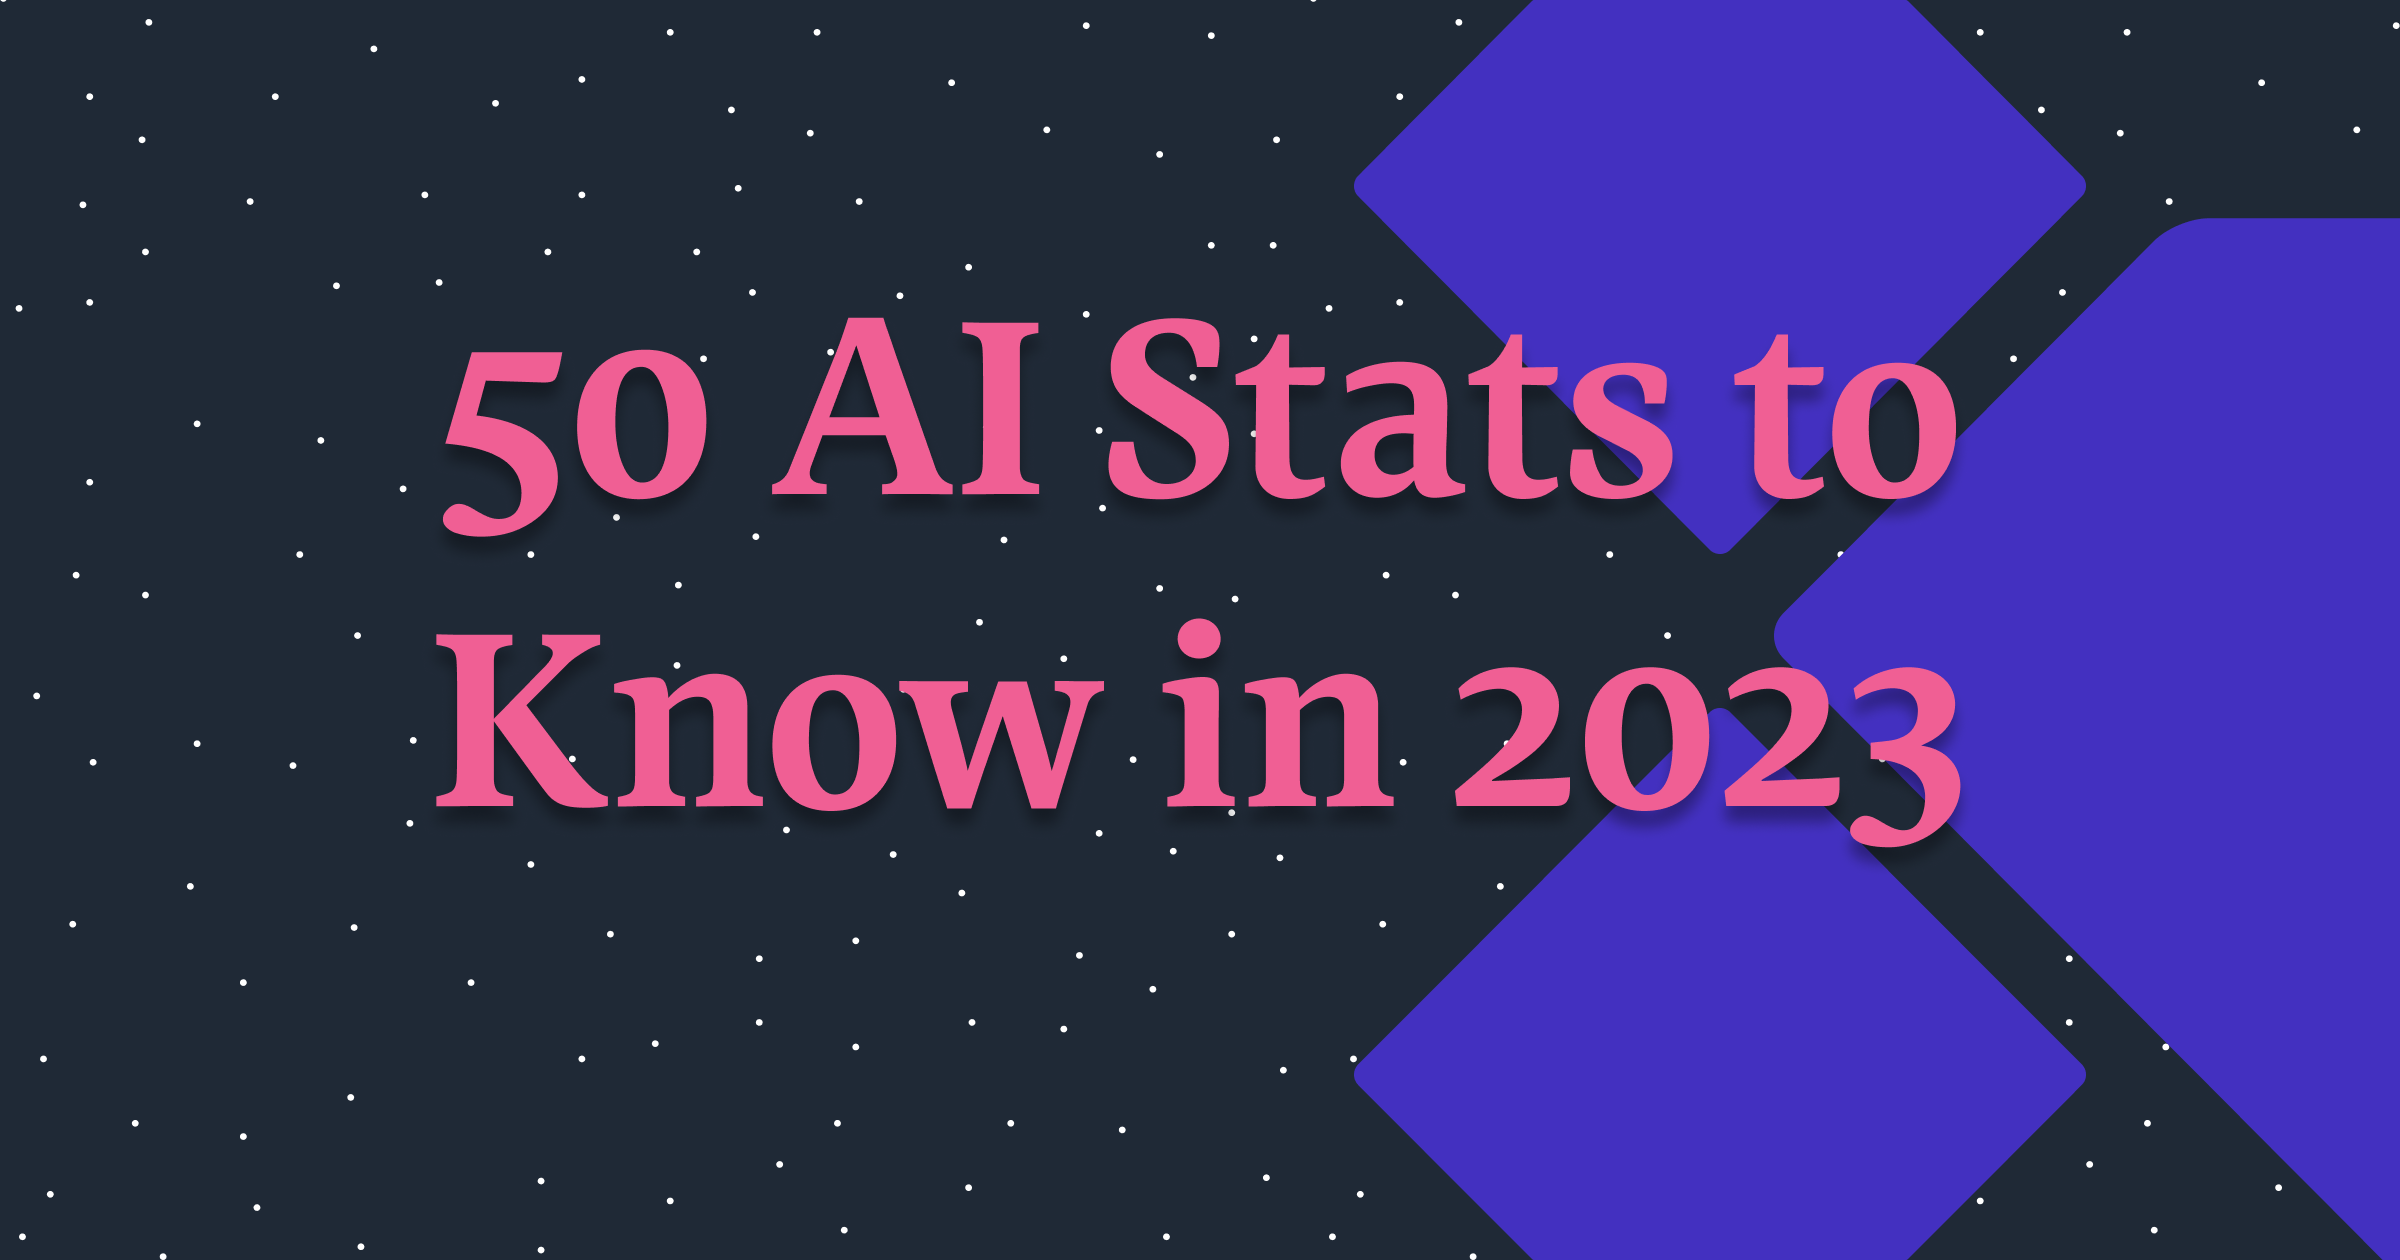 AI Stats: The state of artificial intelligence in 2023